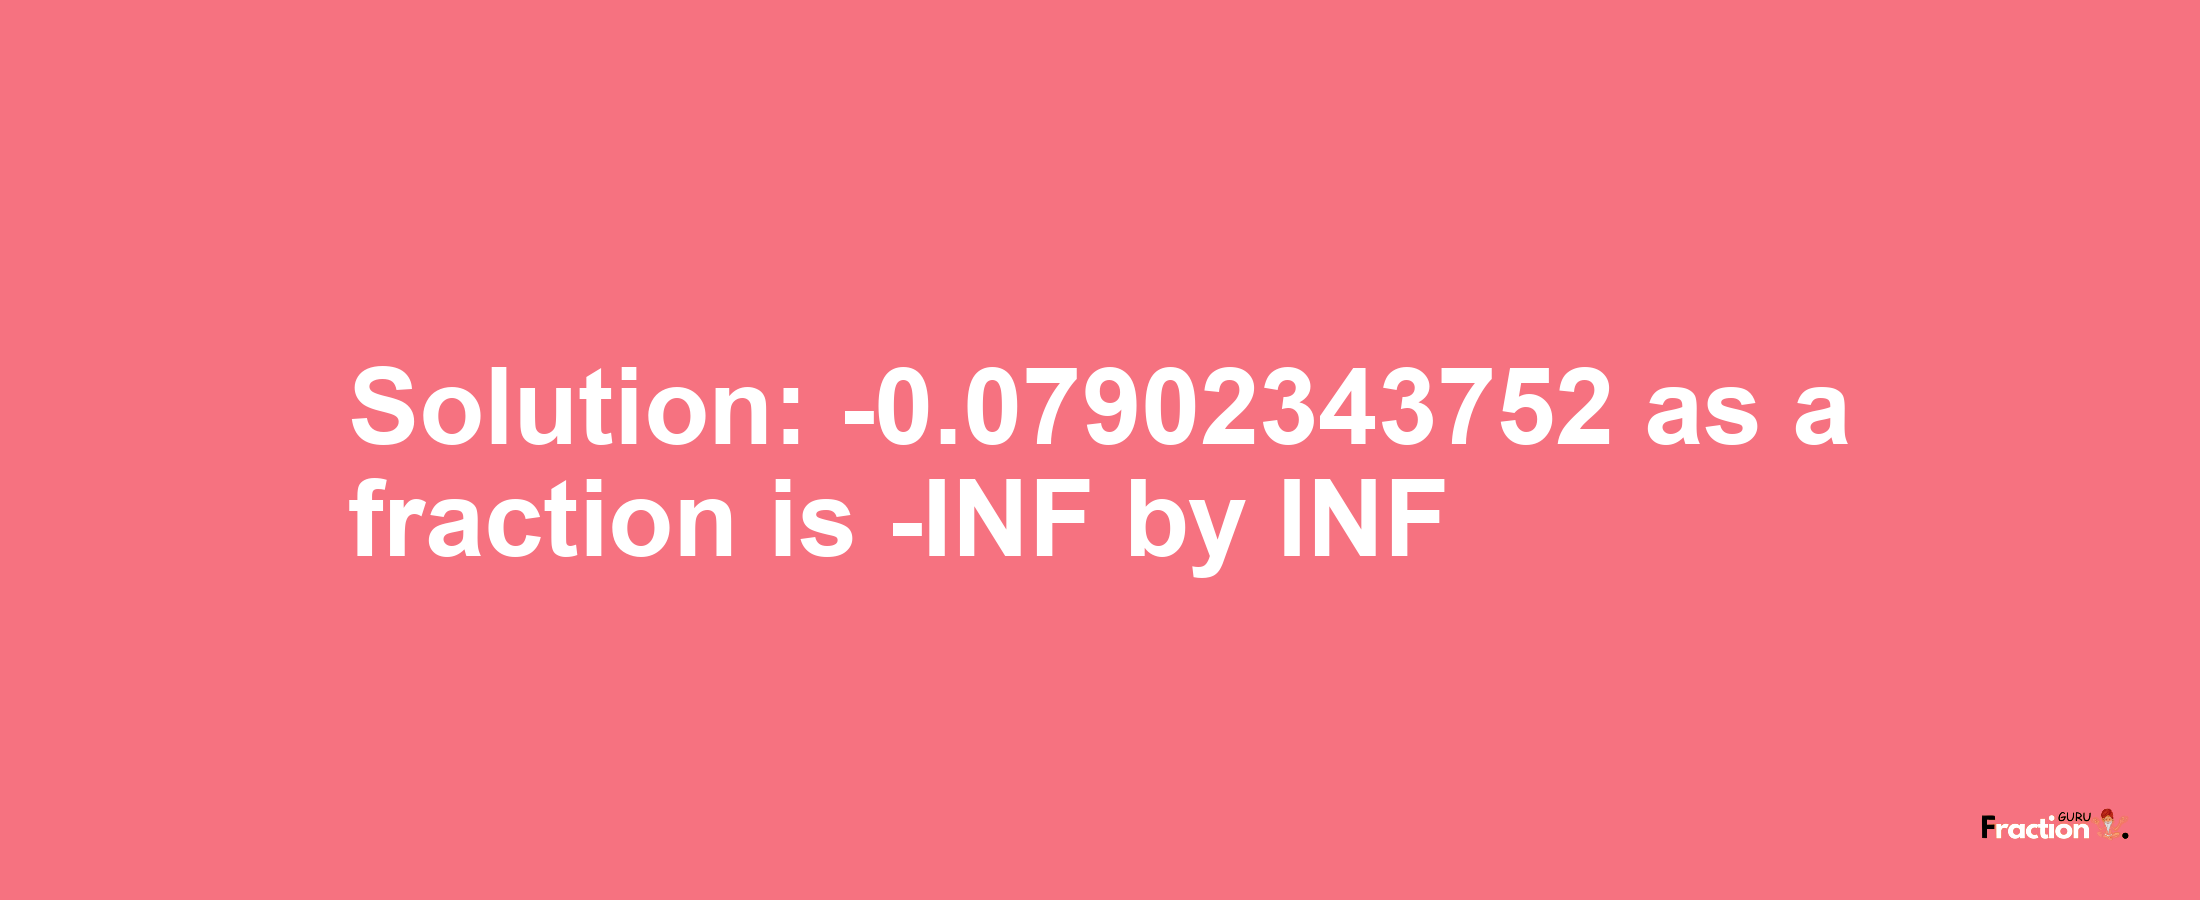 Solution:-0.07902343752 as a fraction is -INF/INF